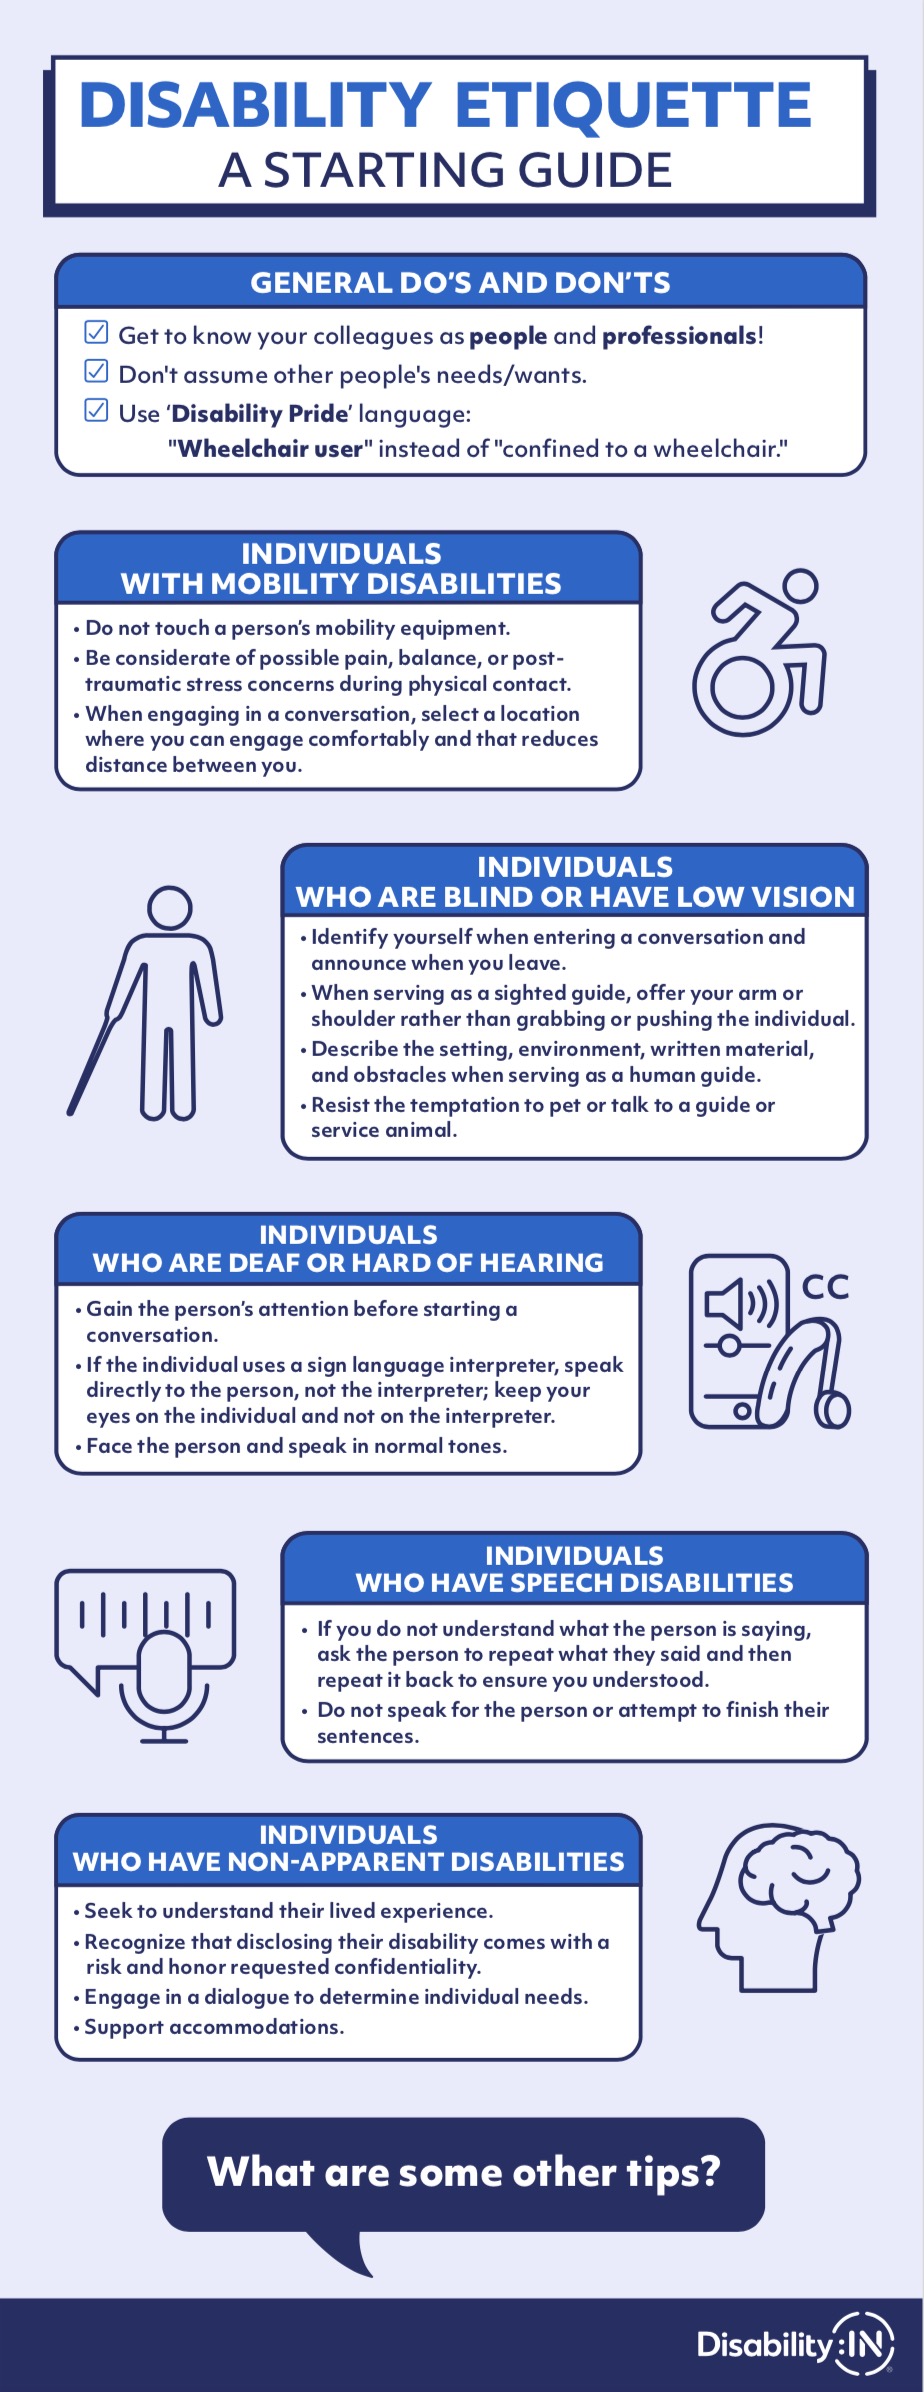 Disability Etiquette: A Starting Guide